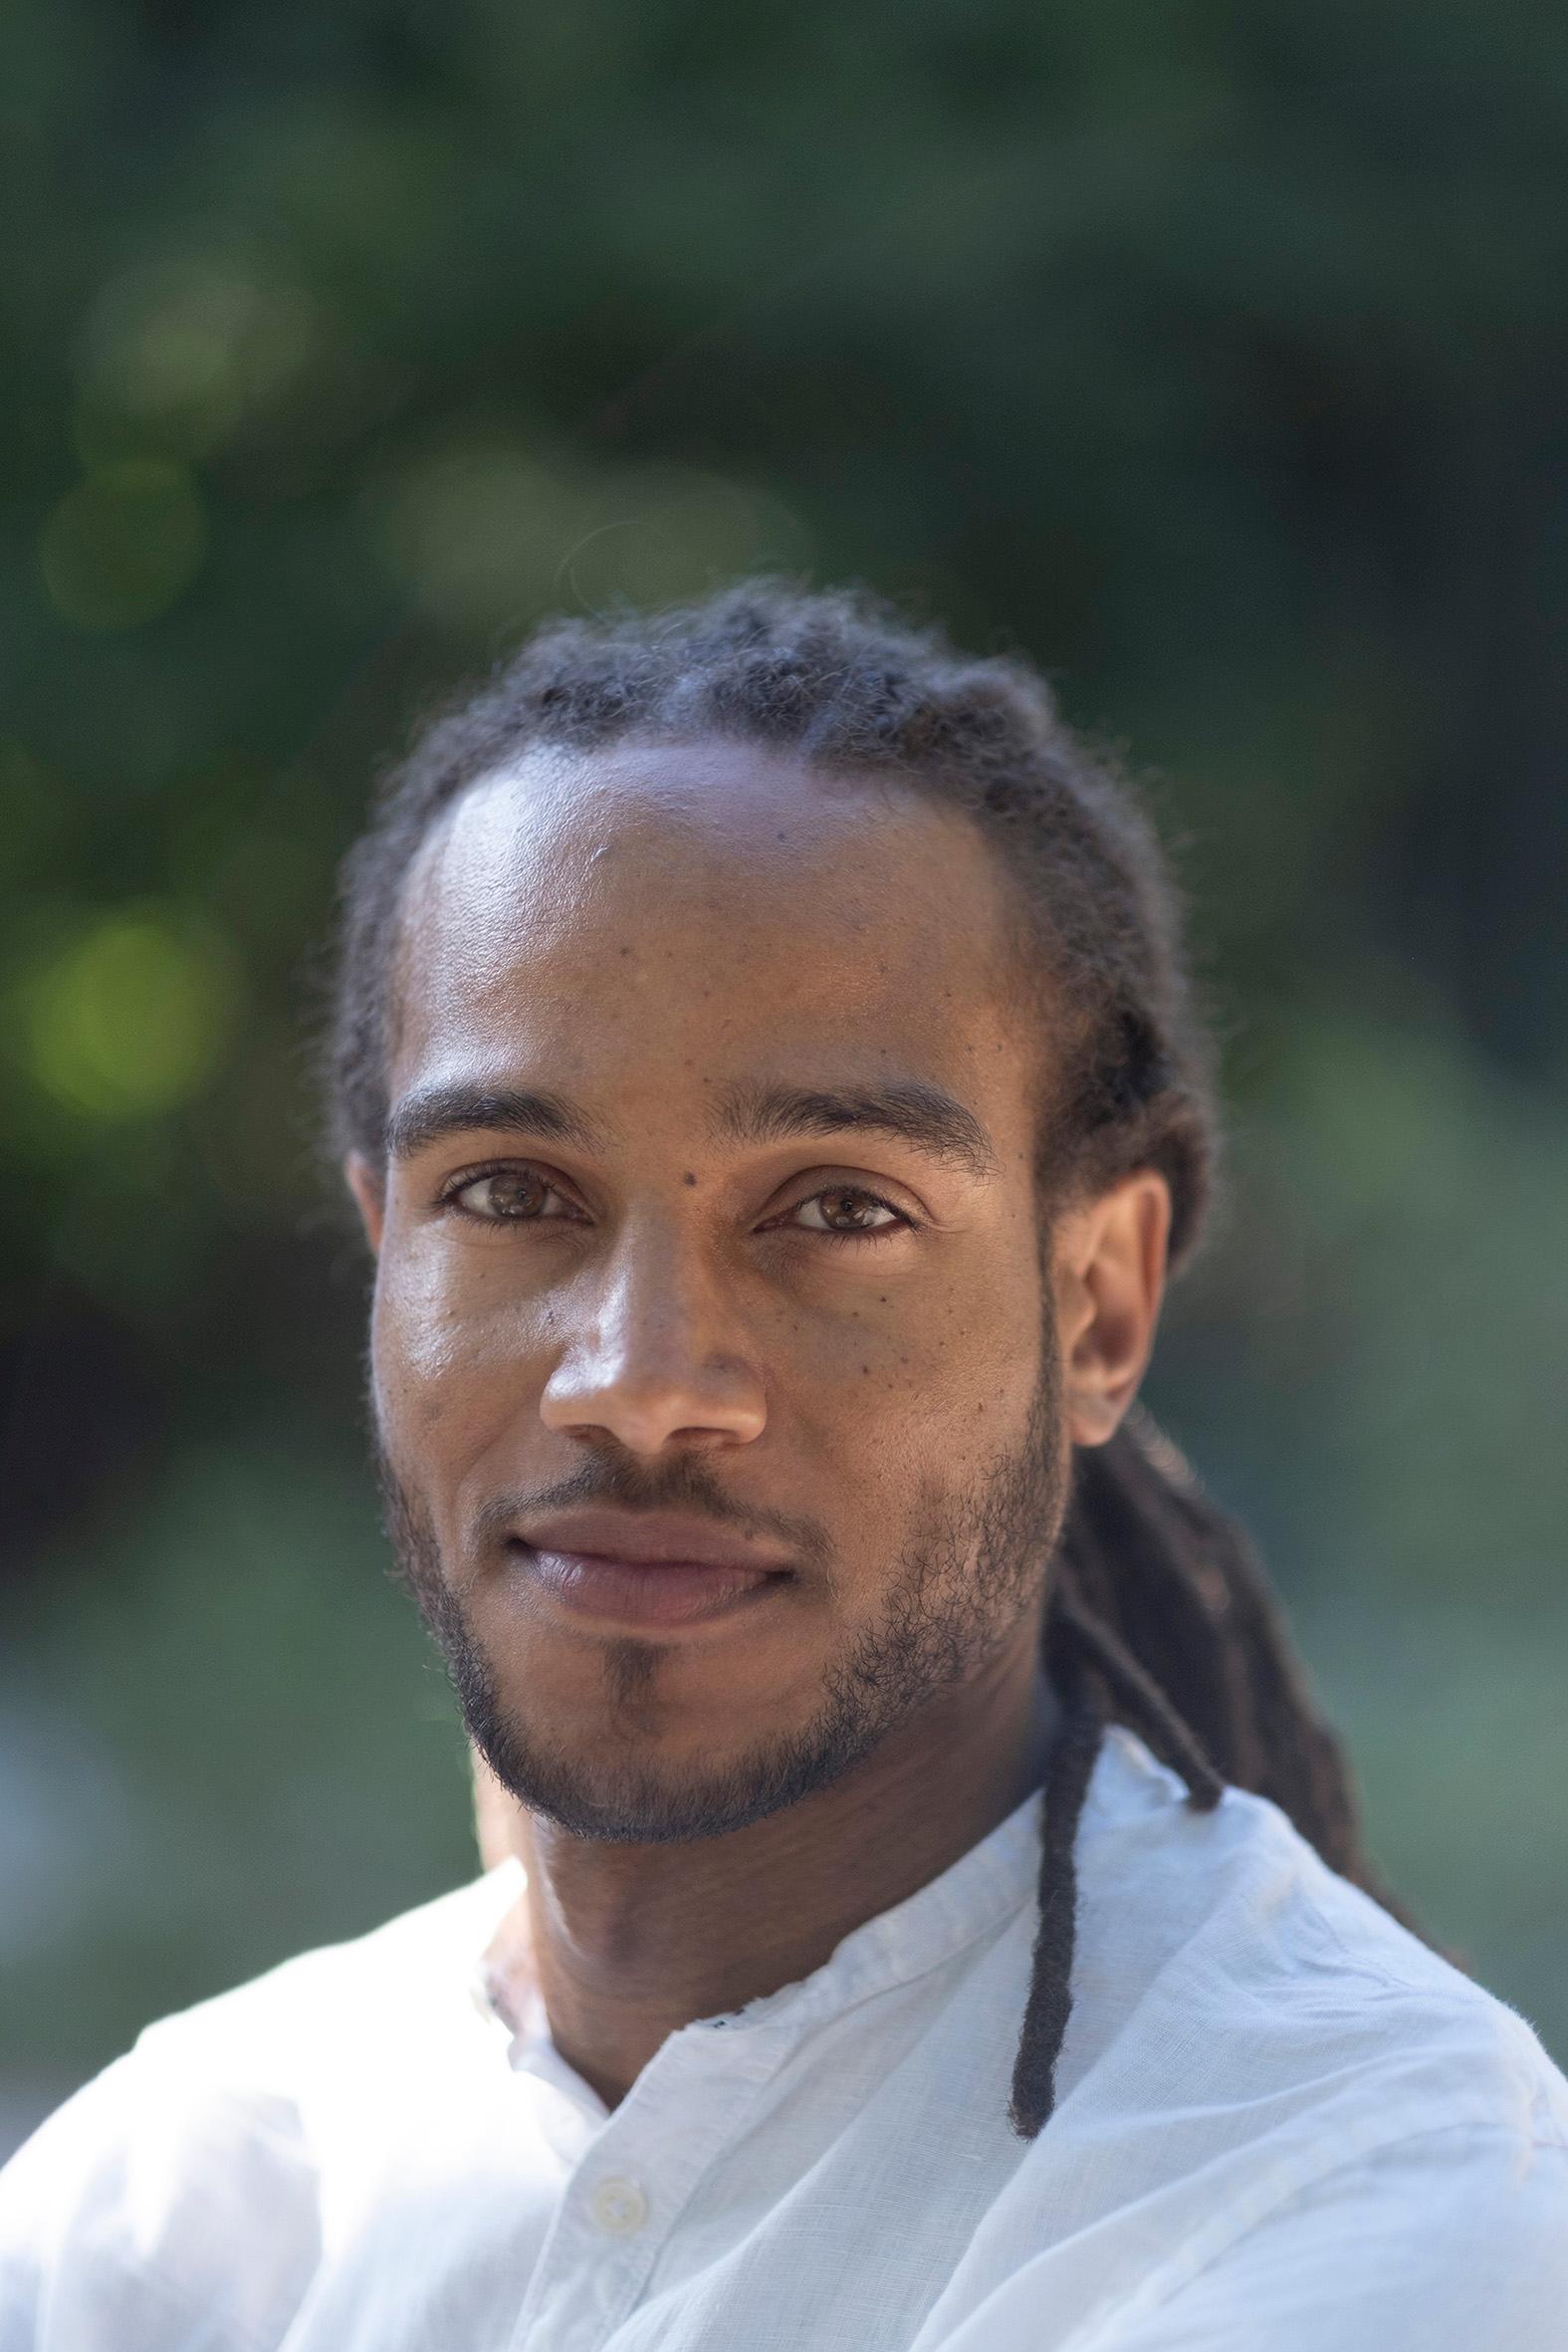 Malcom Ferdinand is a researcher at the French national scientific research center in Paris.